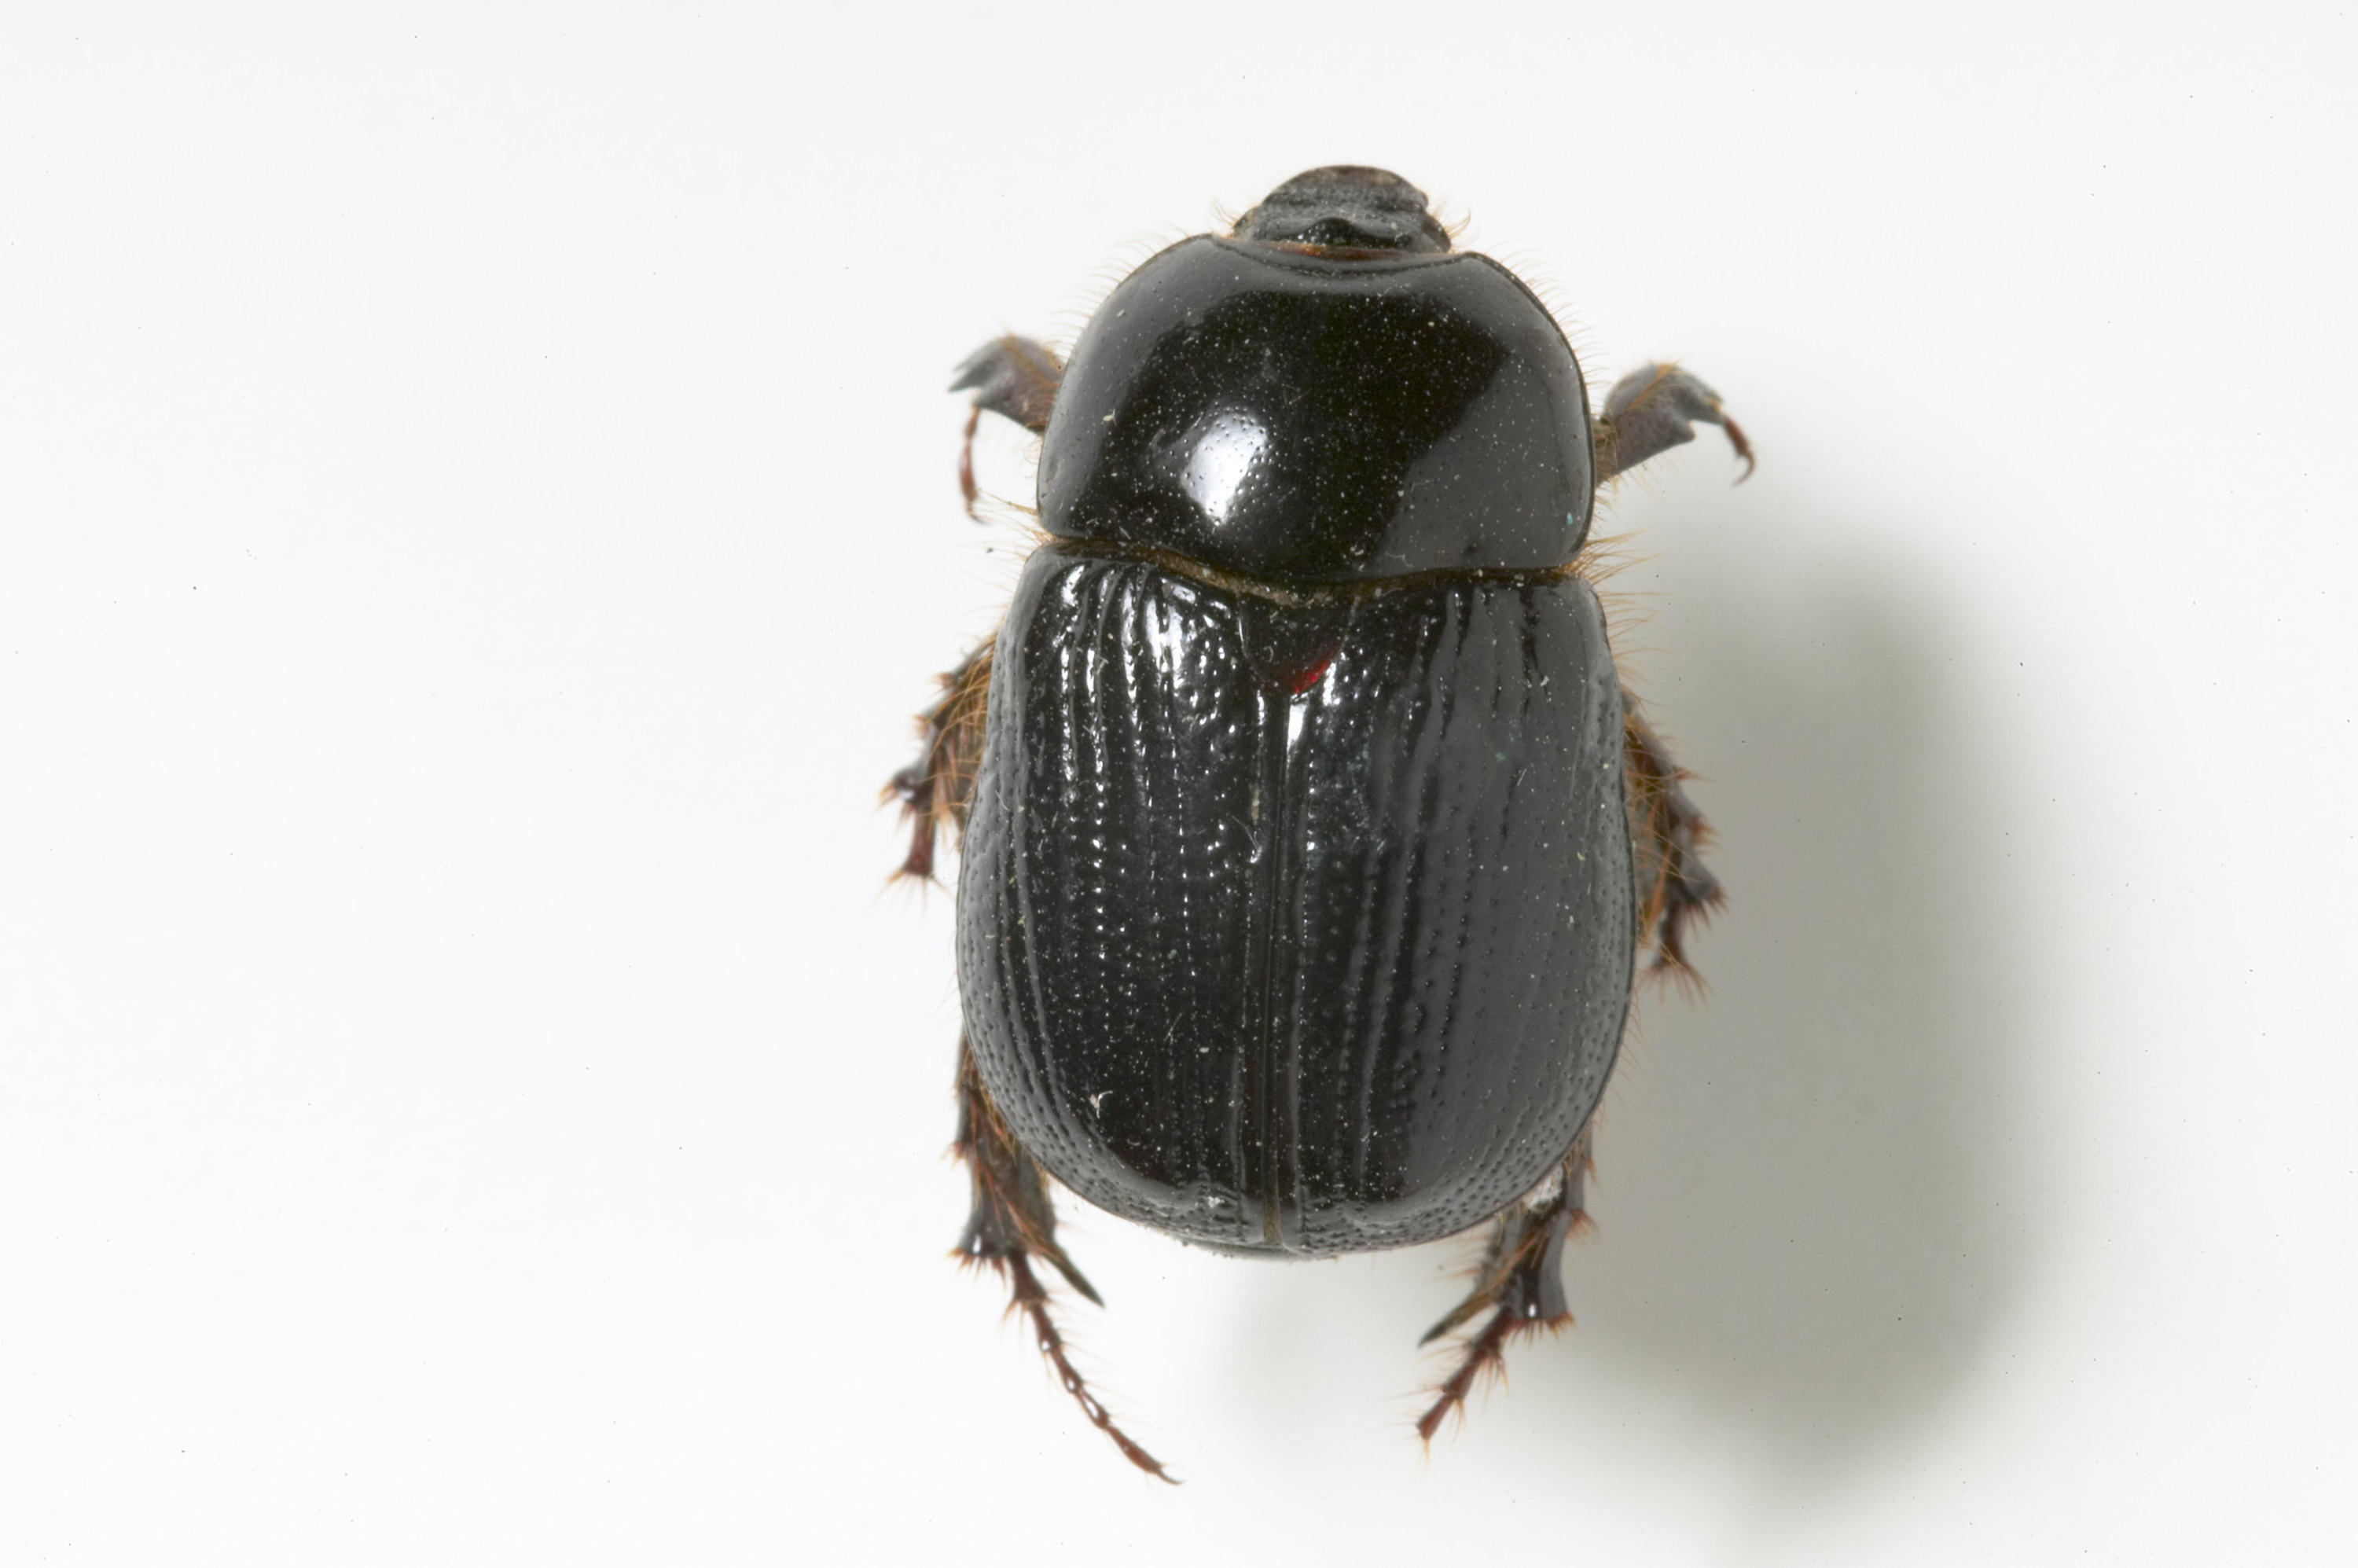 Redheaded cockchafer adult beetle